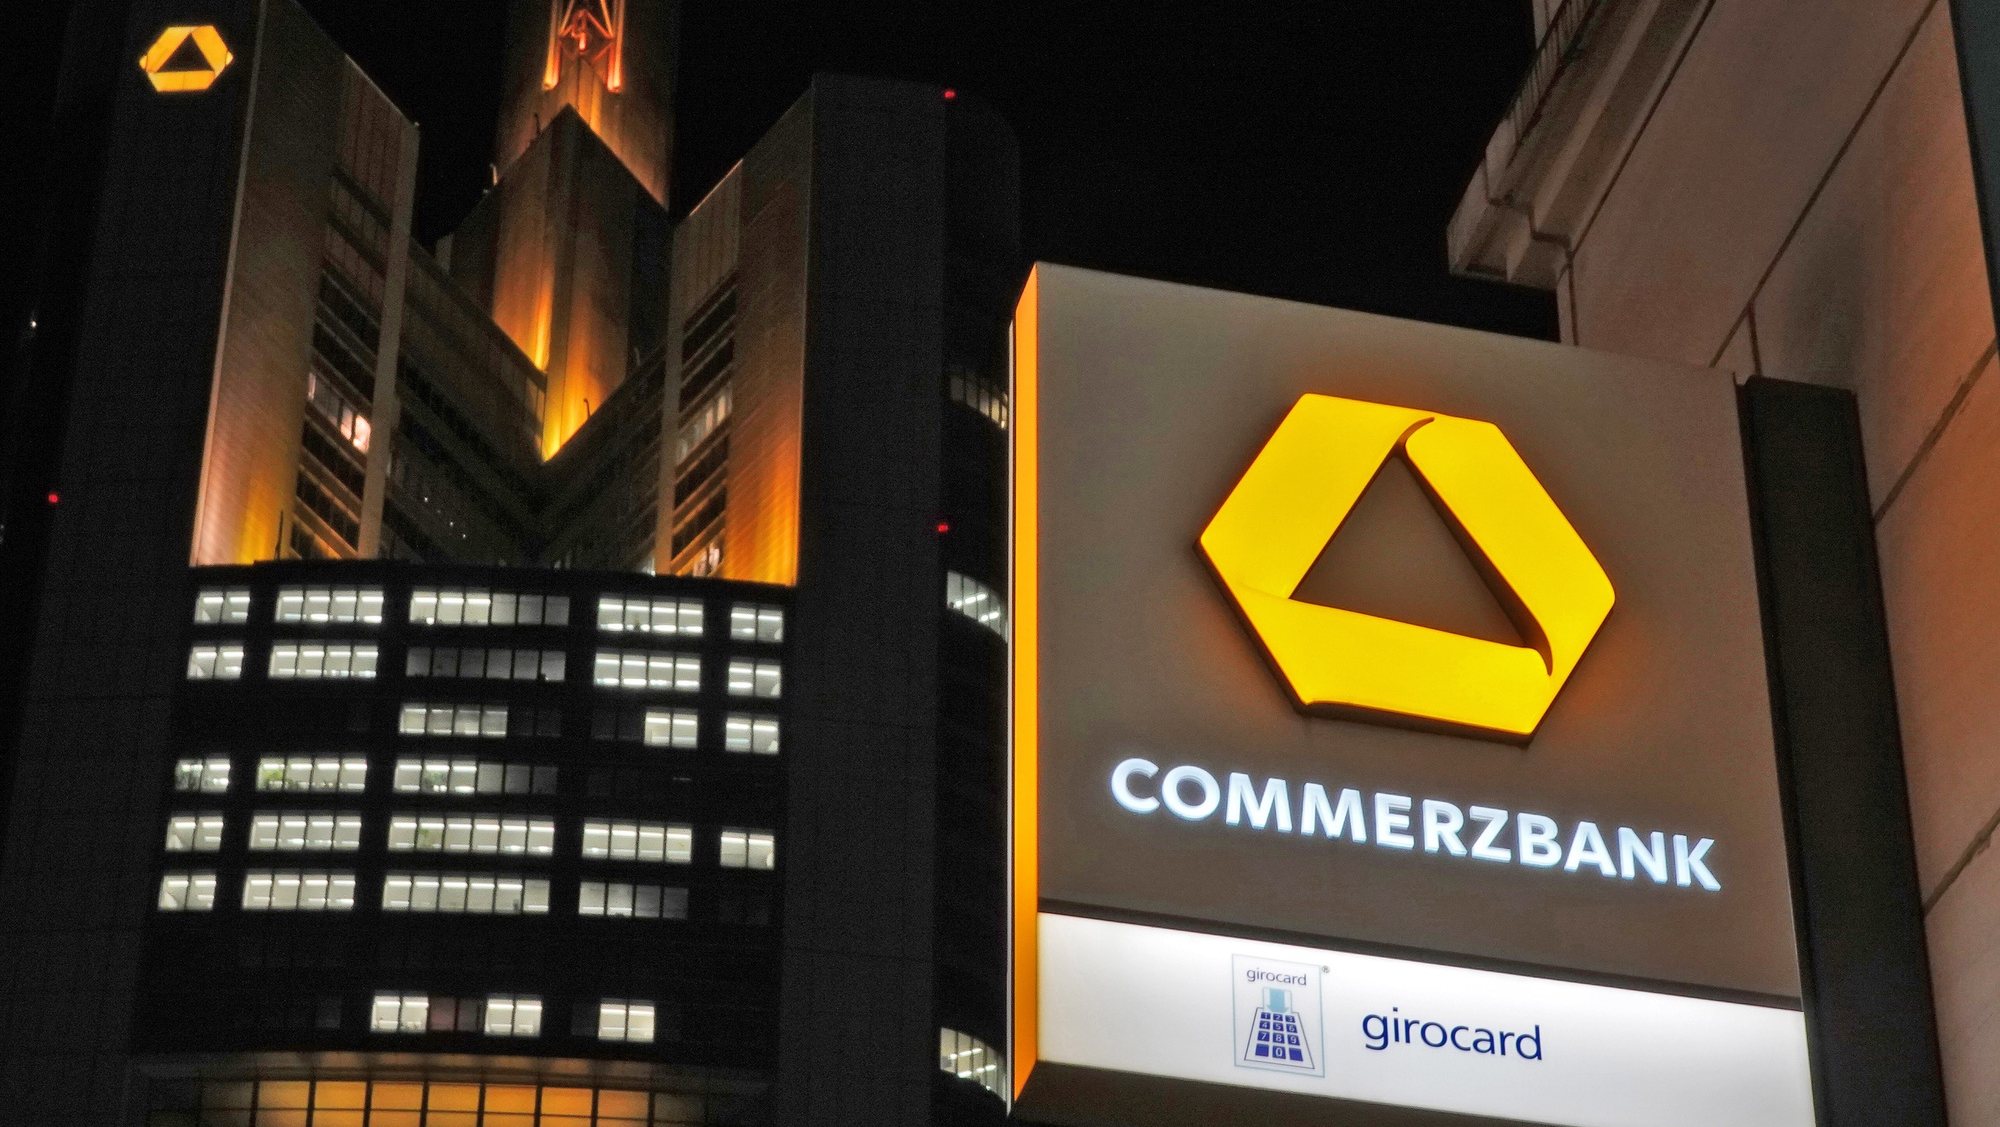 epa08798067 (FILE) - An image showing Commerzbank office tower seen behind a Commerzbank signage at a local branch in Frankfurt, Germany, late 16 January 2020 (reissued 04 November 2020). Commerzbank is to publish their 3rd quarter 2020 results on 05 November 2020.  EPA/MAURITZ ANTIN *** Local Caption *** 55784107